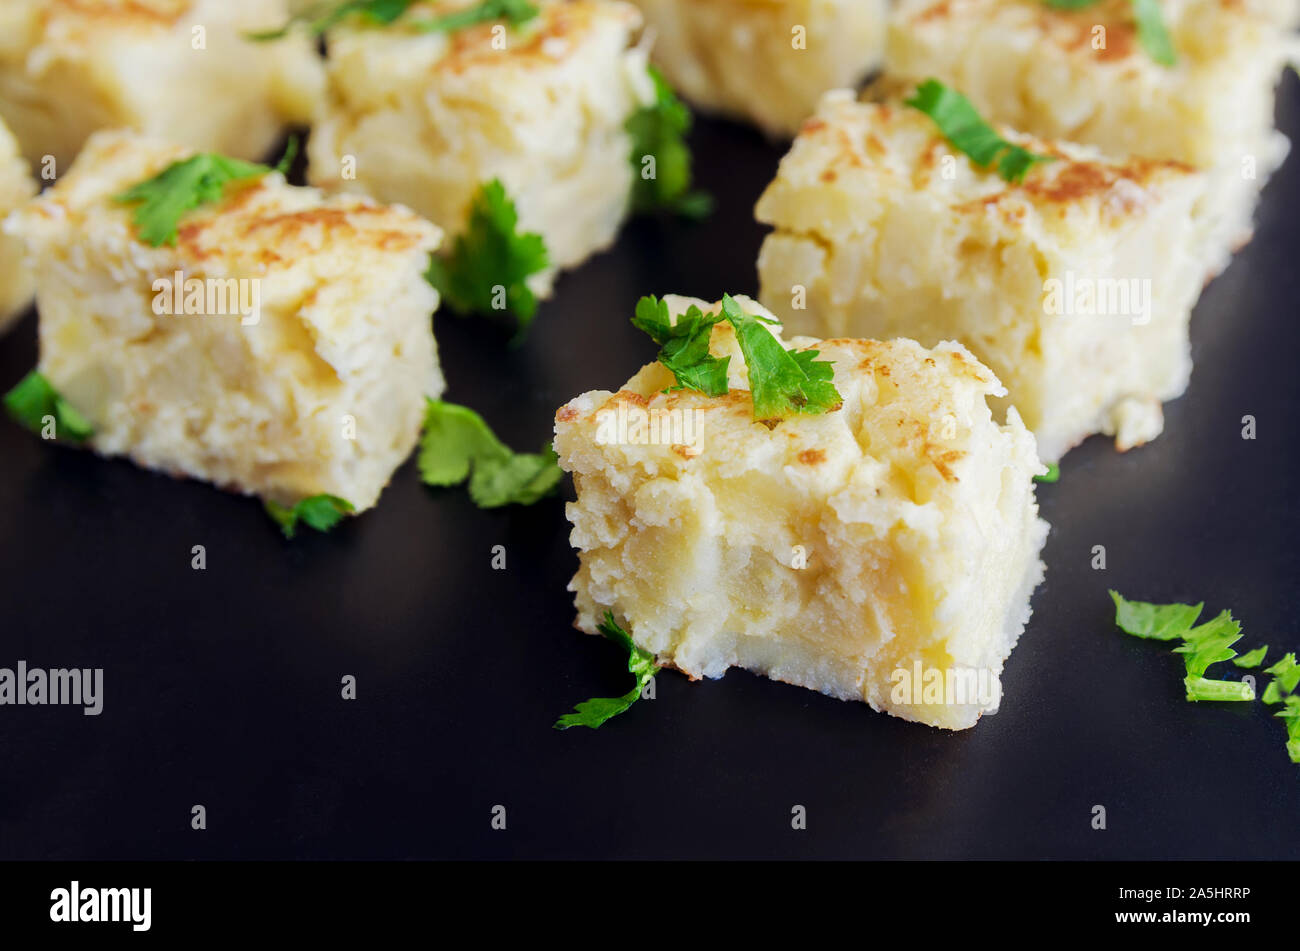 Pinchos  de  Tortilla, Spanish omelette made with eggs and potatoes. Traditional Spanish tapas or snack  on black bacground. Stock Photo